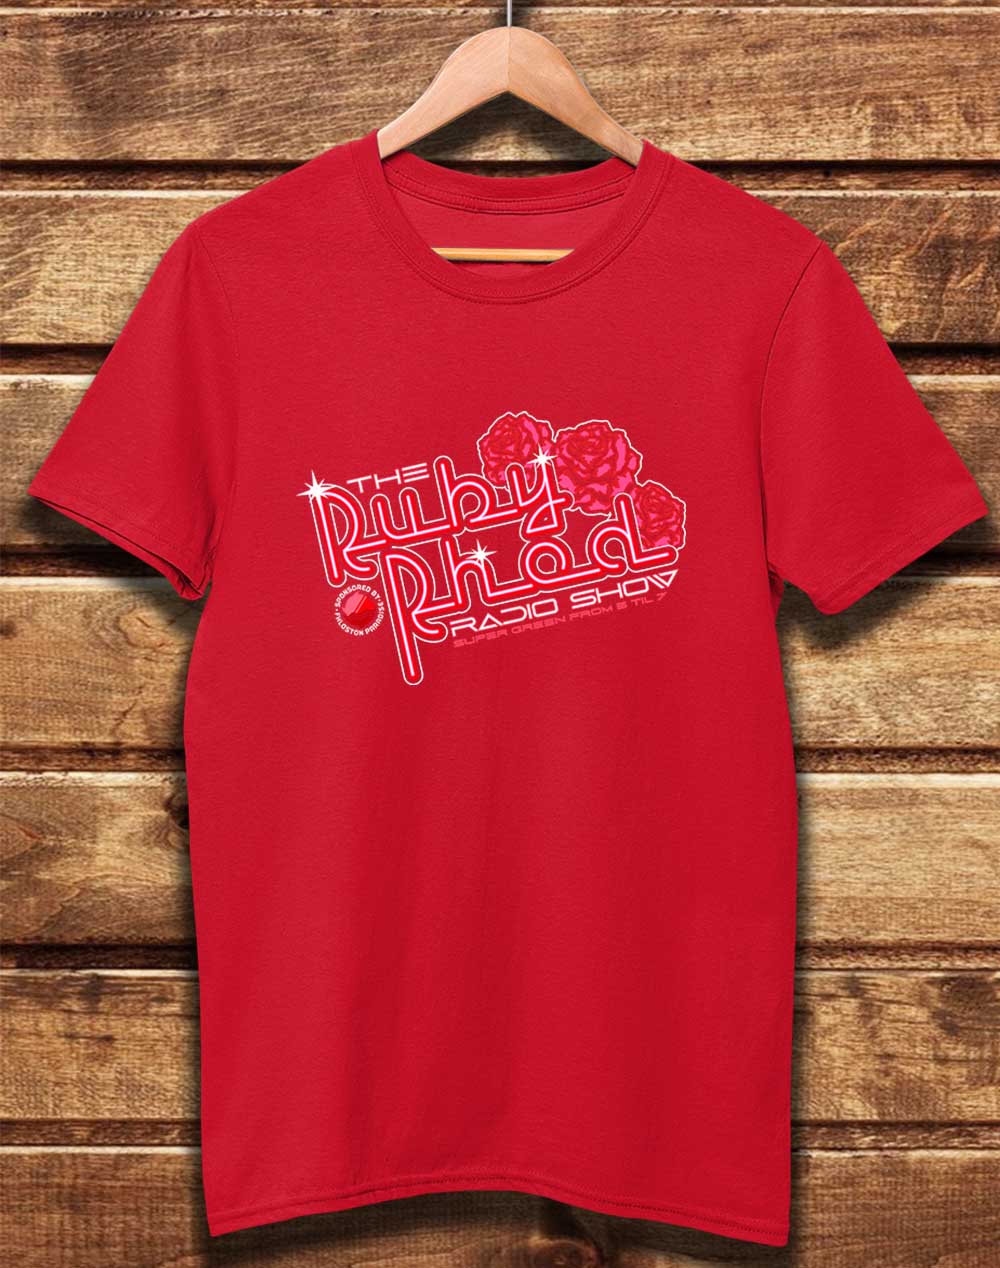 Red - DELUXE Ruby Rhod Radio Show Organic Cotton T-Shirt